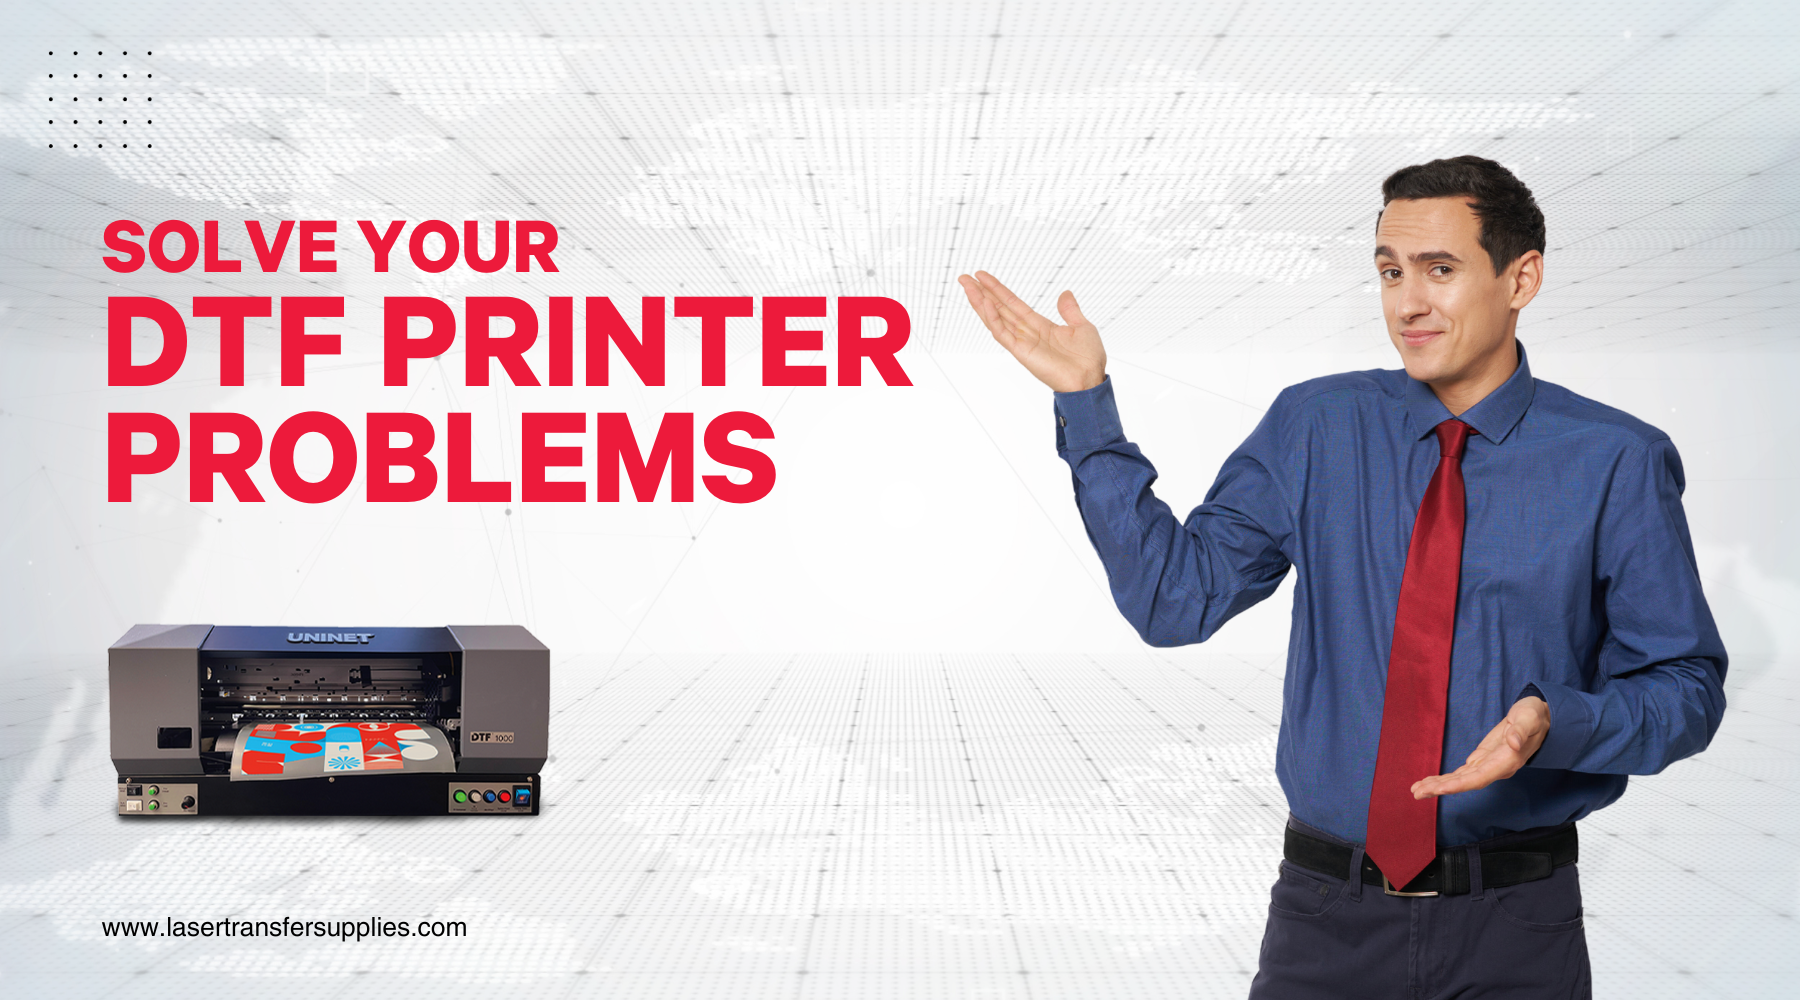 Troubleshooting Common Issues with DTF Printing – Procolored